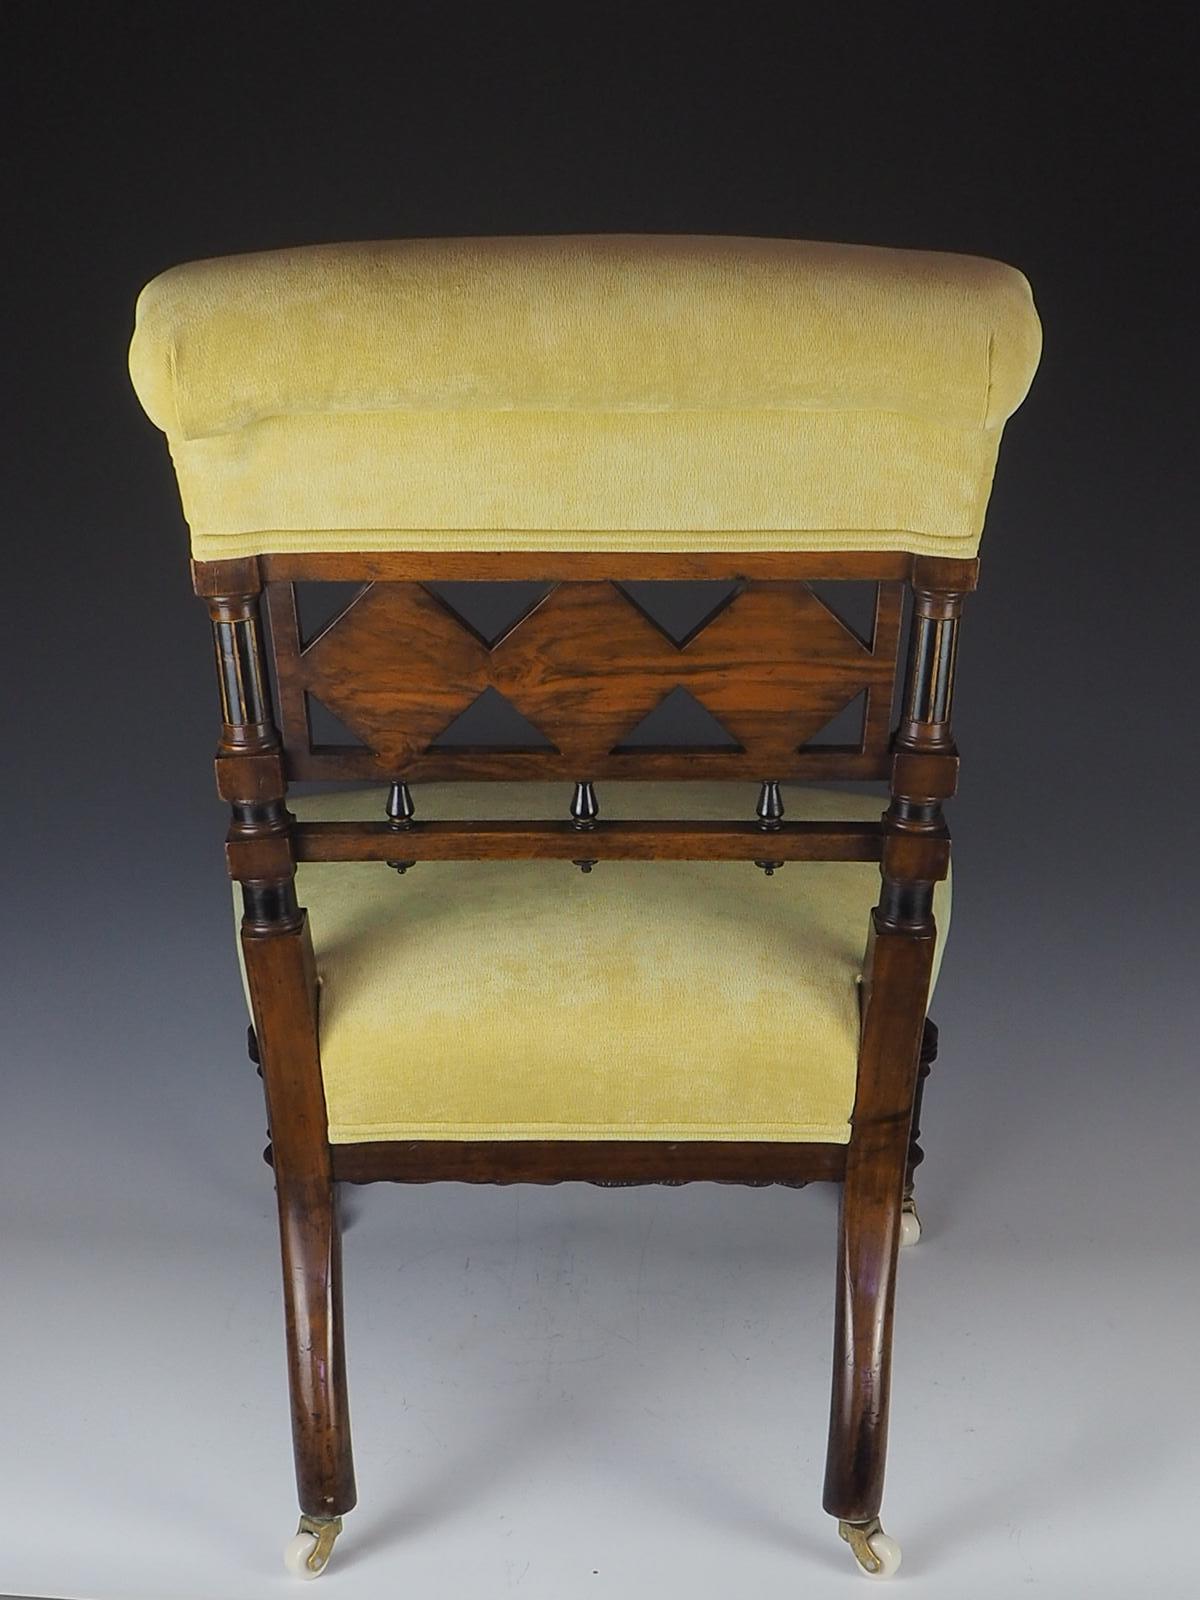 English Aesthetic Movement Ebonised and Gilt Side Chair with Hand Painted Birds, c. 1870 For Sale